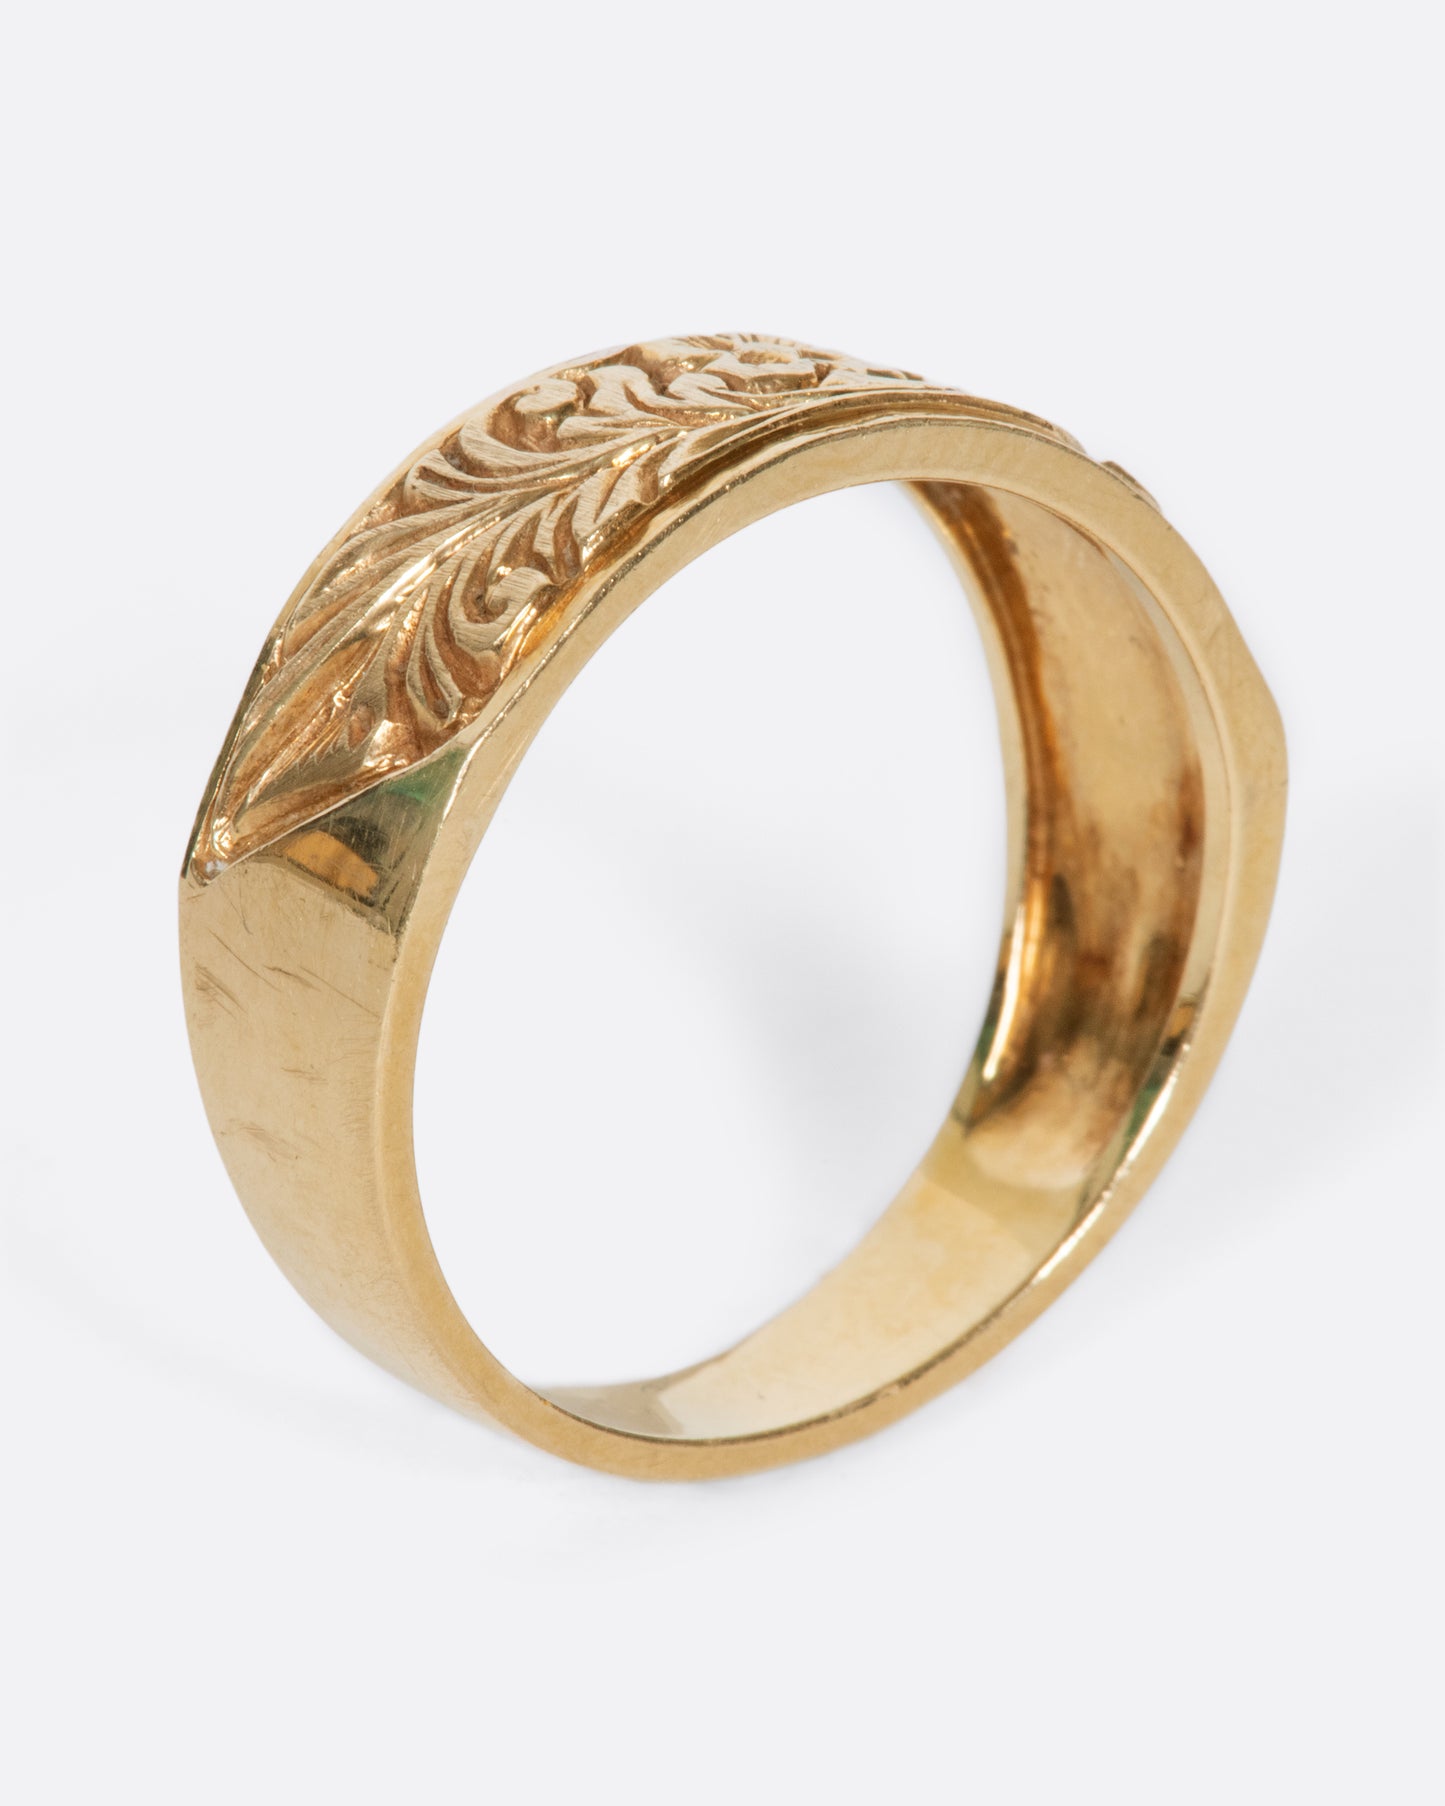 A vintage yellow gold band ring with a flower and leaves carved into the front half of it.